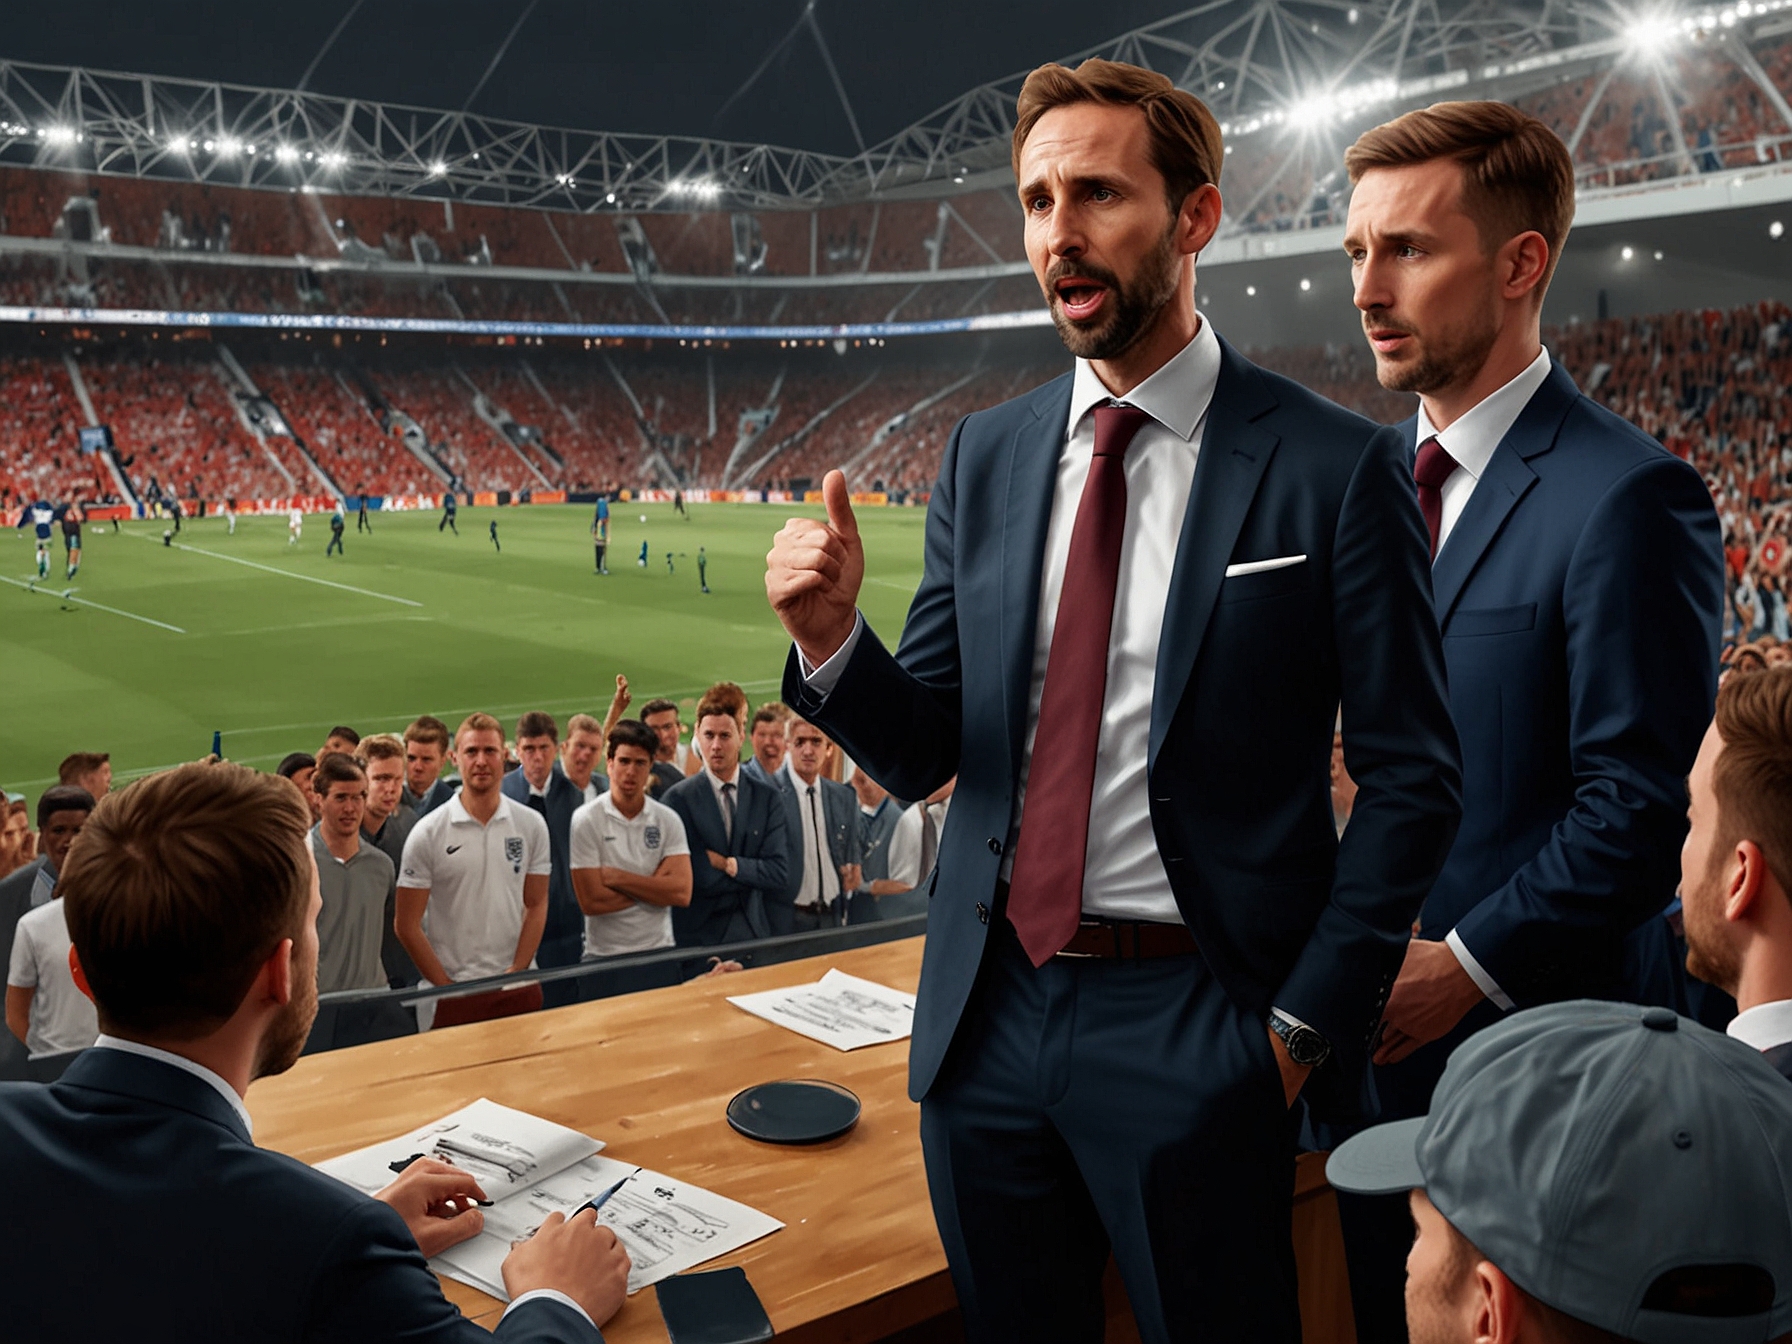 Gareth Southgate announcing the England squad for Euro 2024, notably missing Jack Grealish, with a backdrop of eager fans and analysts debating the decision.